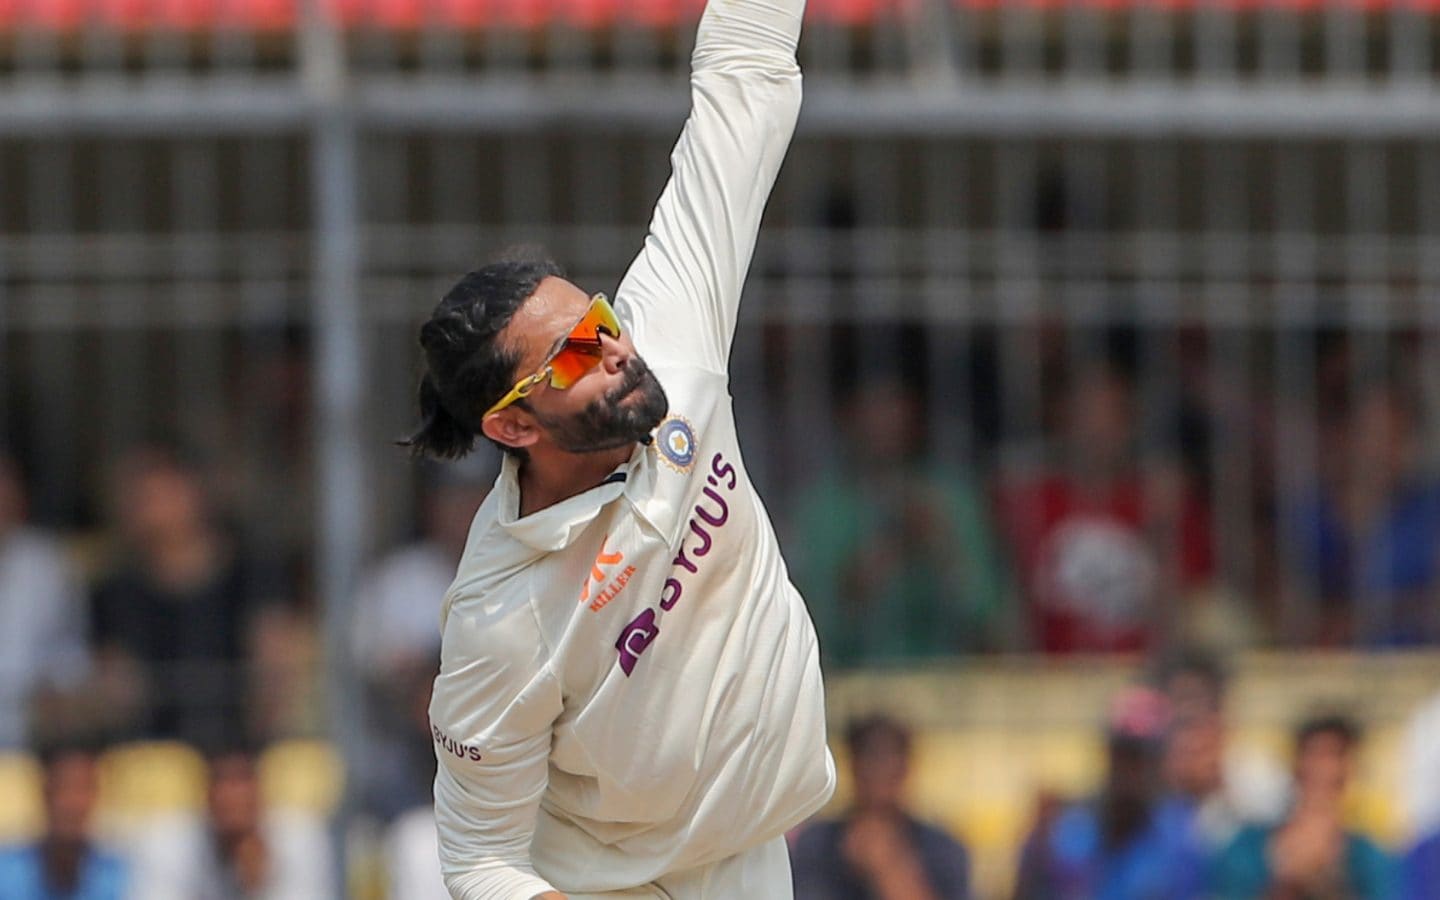 ‘This Could Cost India’: Sunil Gavaskar Unimpressed With Ravindra Jadeja’s ‘Wicket-taking’ No-Ball in 3rd Test